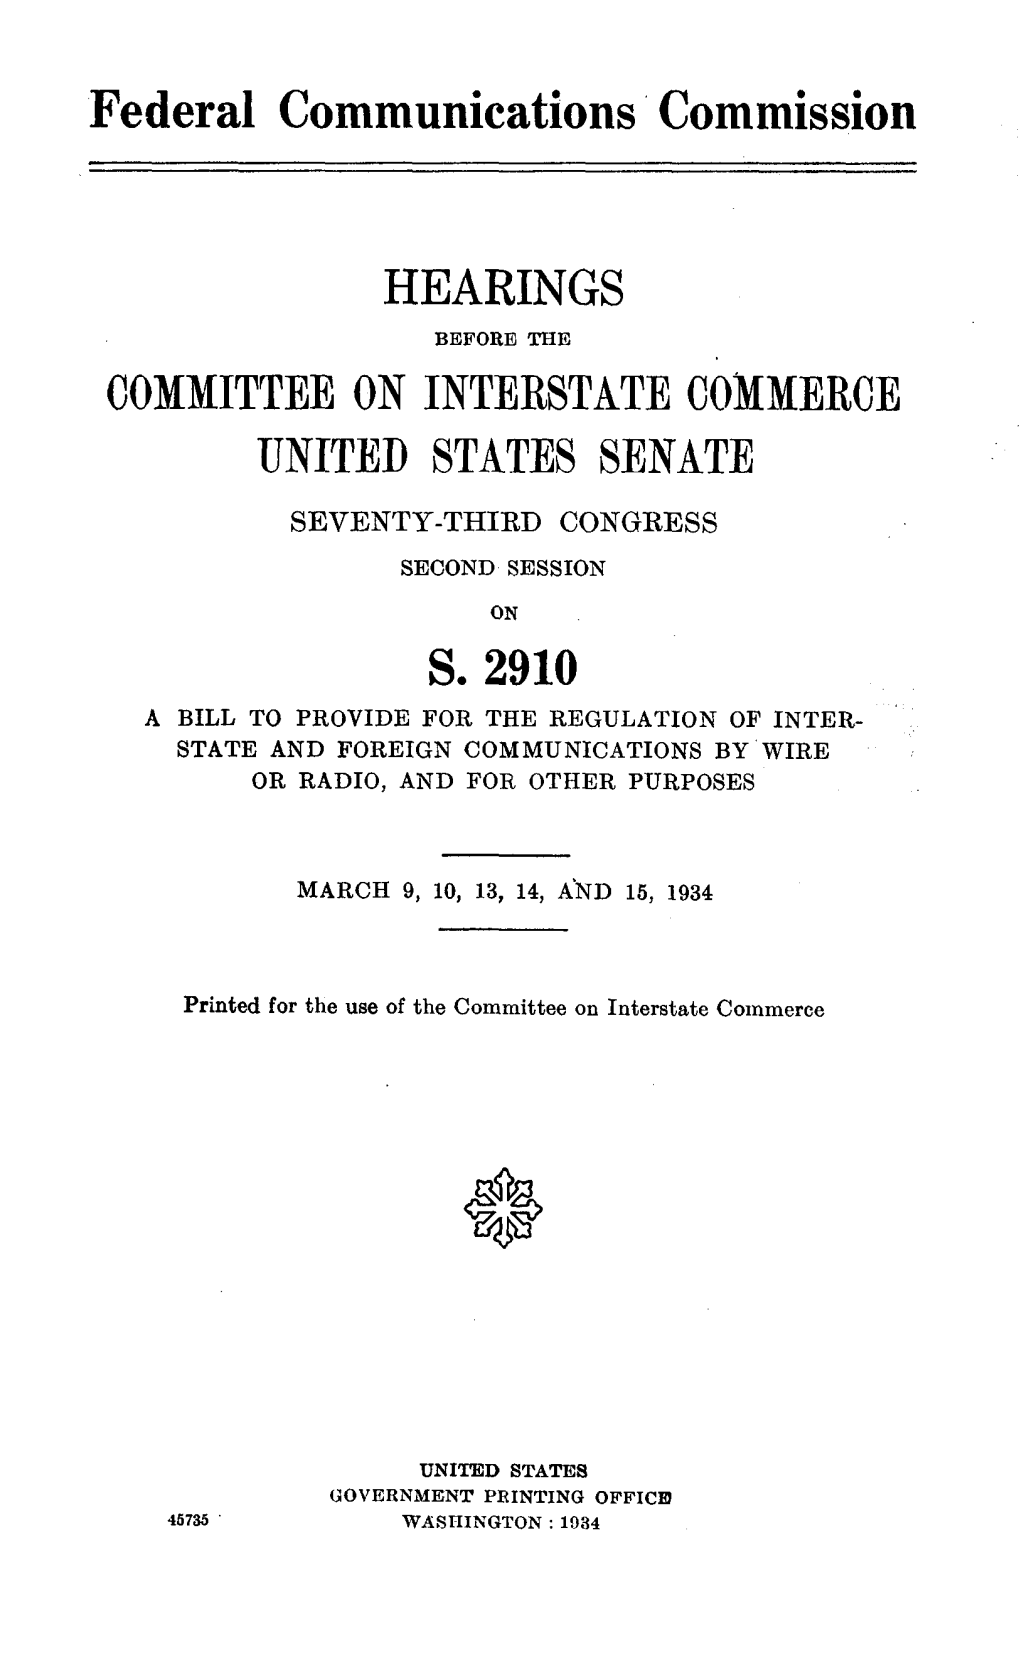 Hearings Before the Committee on Interstate Commerce United States Senate Seventy-Third Congress